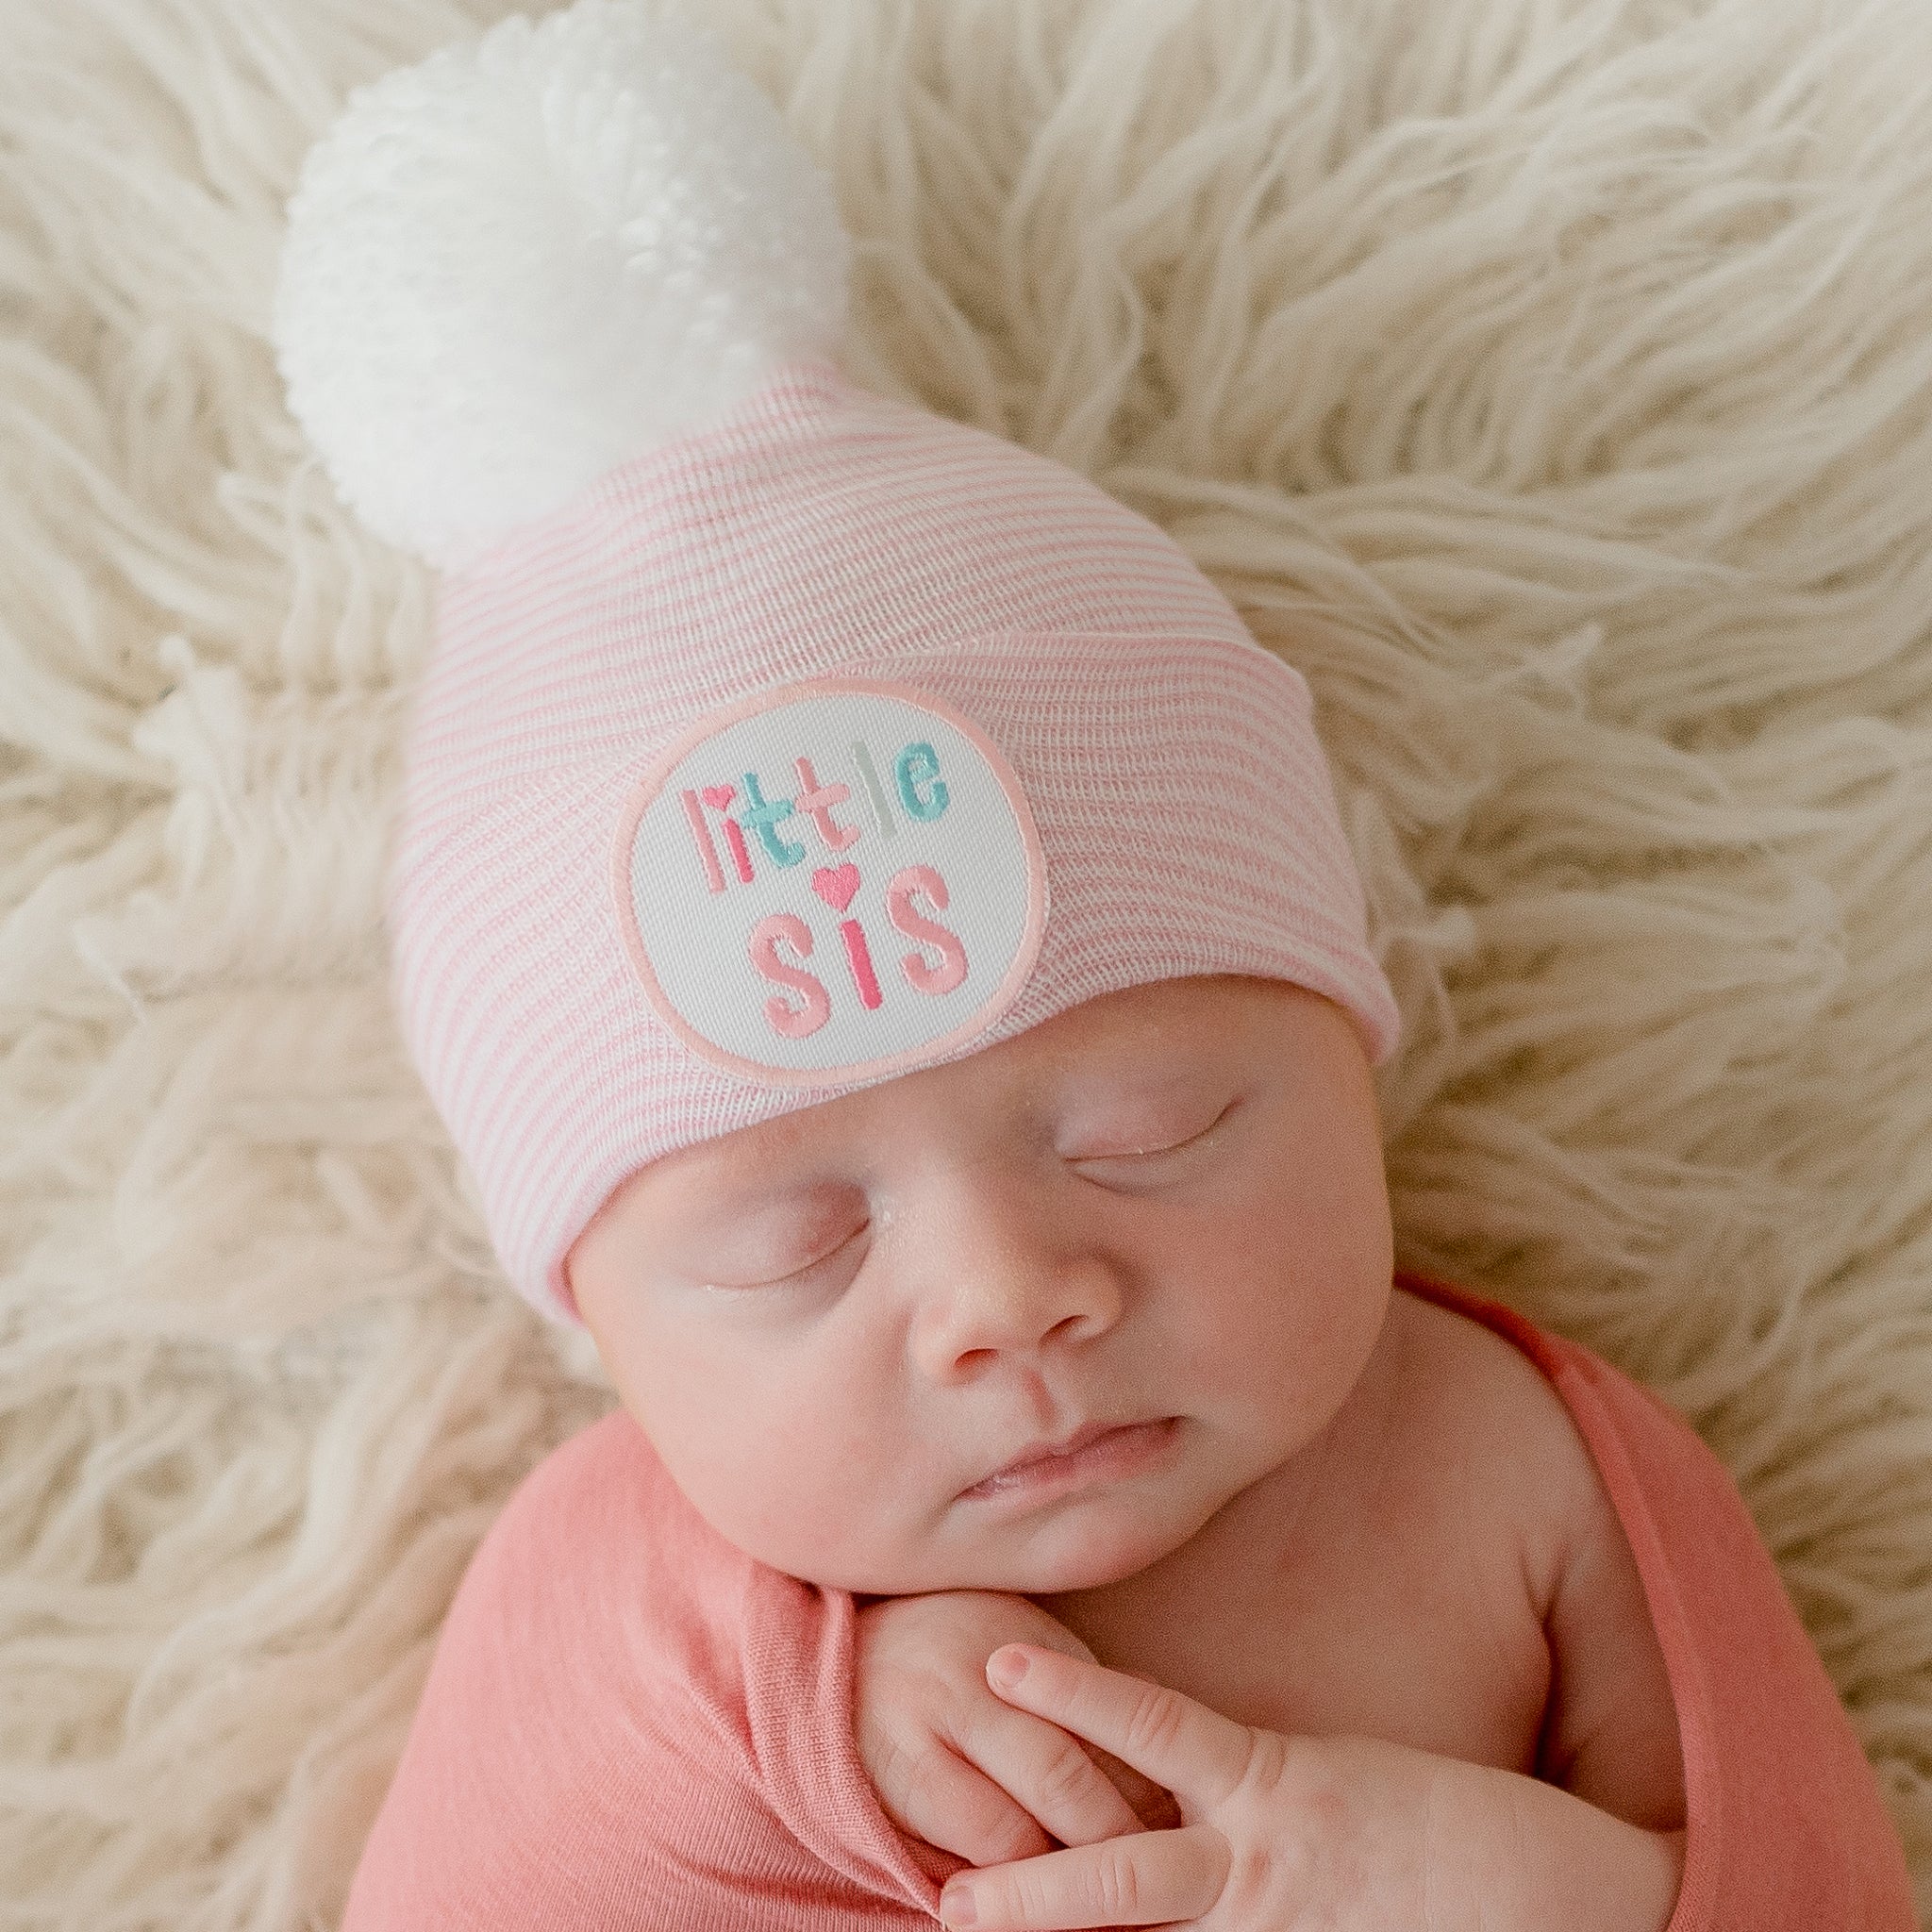 ilybean Little Sis with White Pom Pom Newborn Girl Hospital Hat - White, Pink and Striped Hat